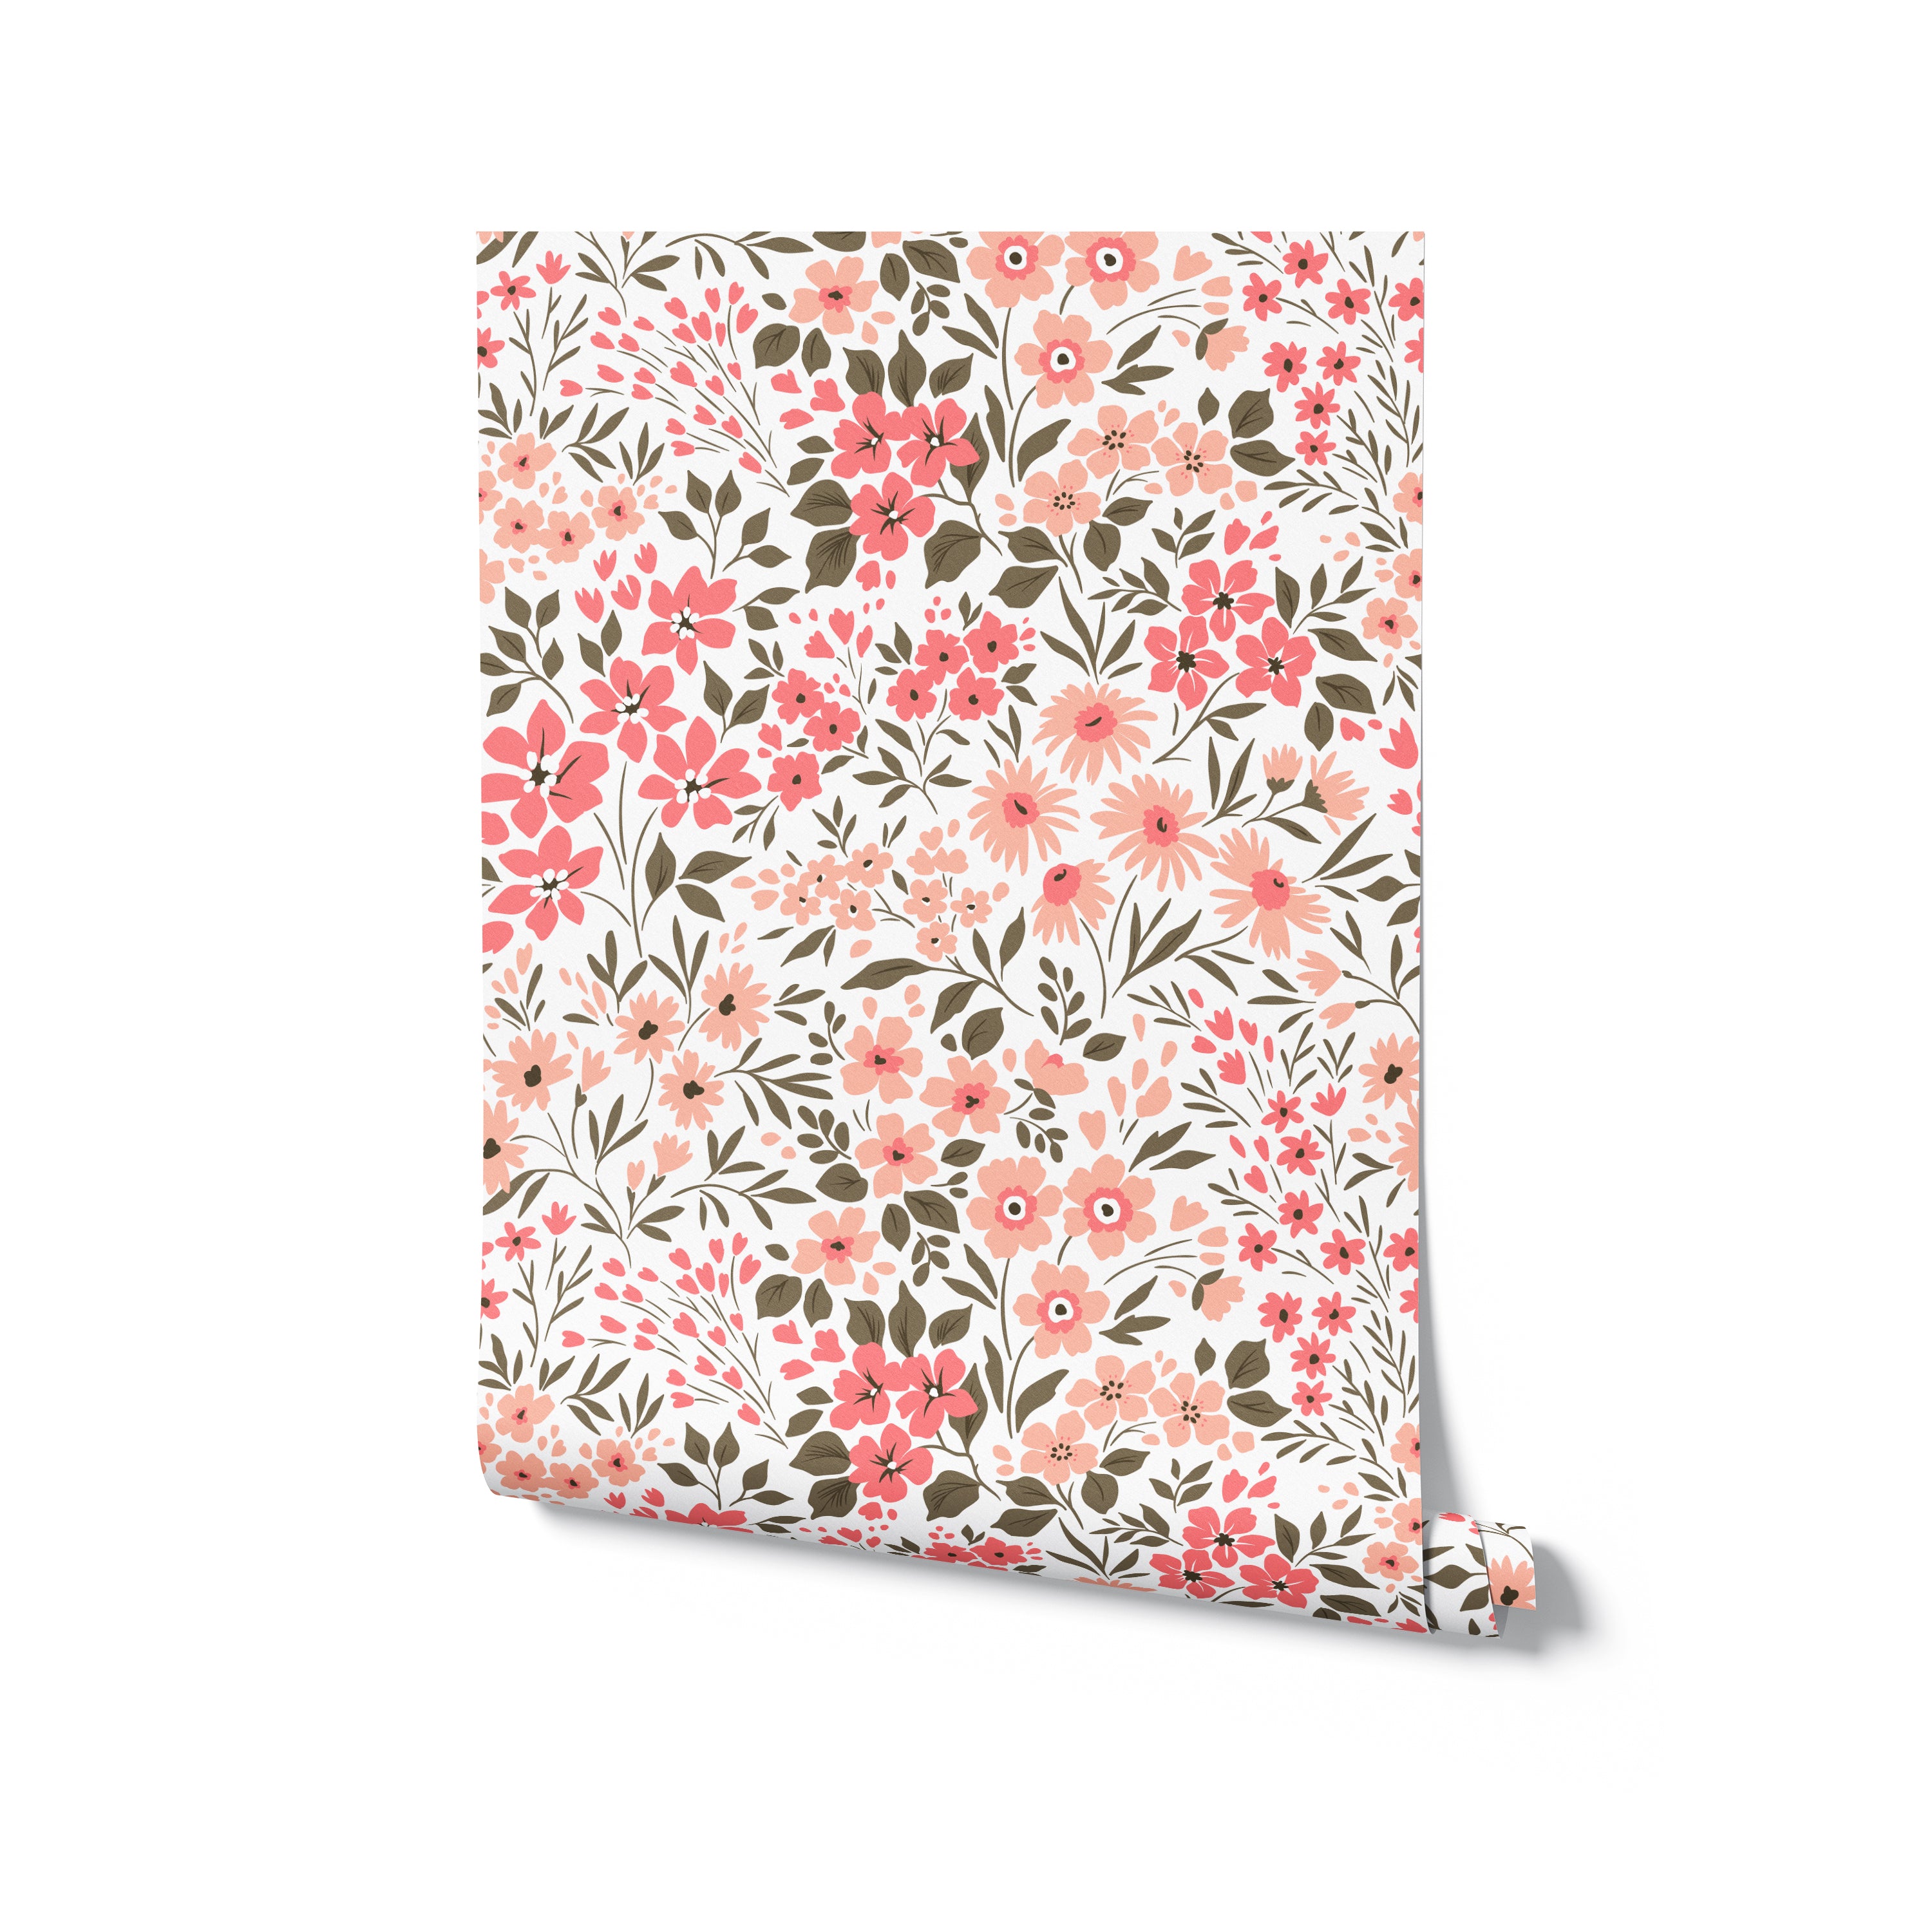 A rolled-up Floral Frenzy Wallpaper, standing against a plain background. The visible part of the wallpaper shows a charming and colorful pattern of pink and peach flowers intertwined with green foliage.